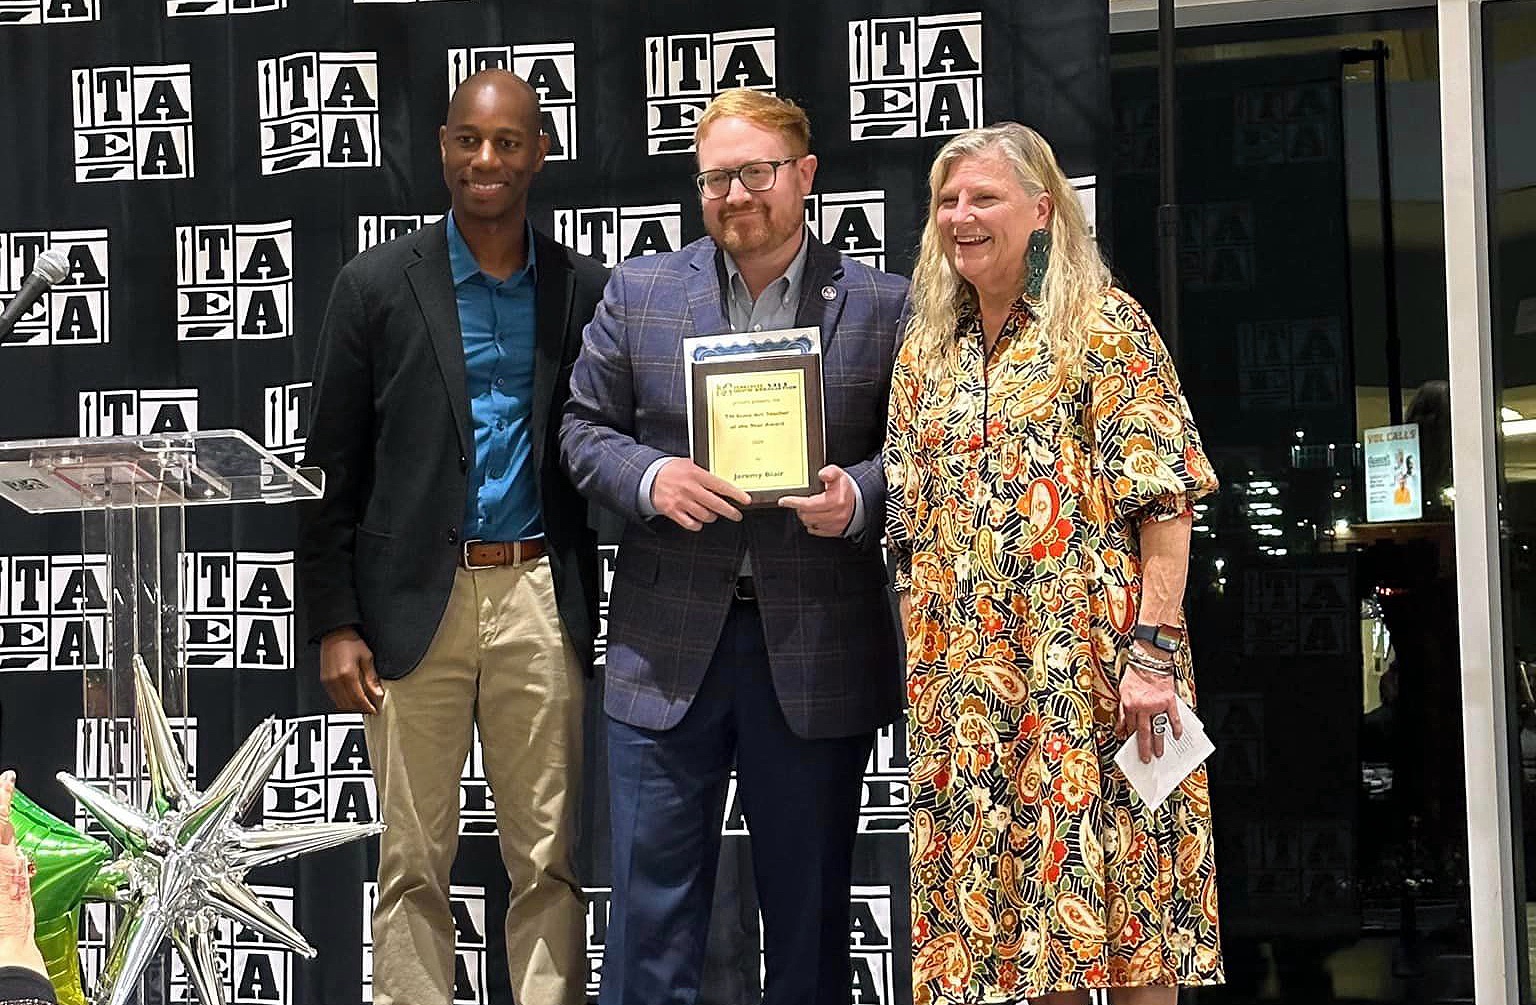 Jeremy Blair, center, associate professor of art education at Tennessee Tech, accepts the Art Education of the Year award from officials from the Tennessee Art Education Association.